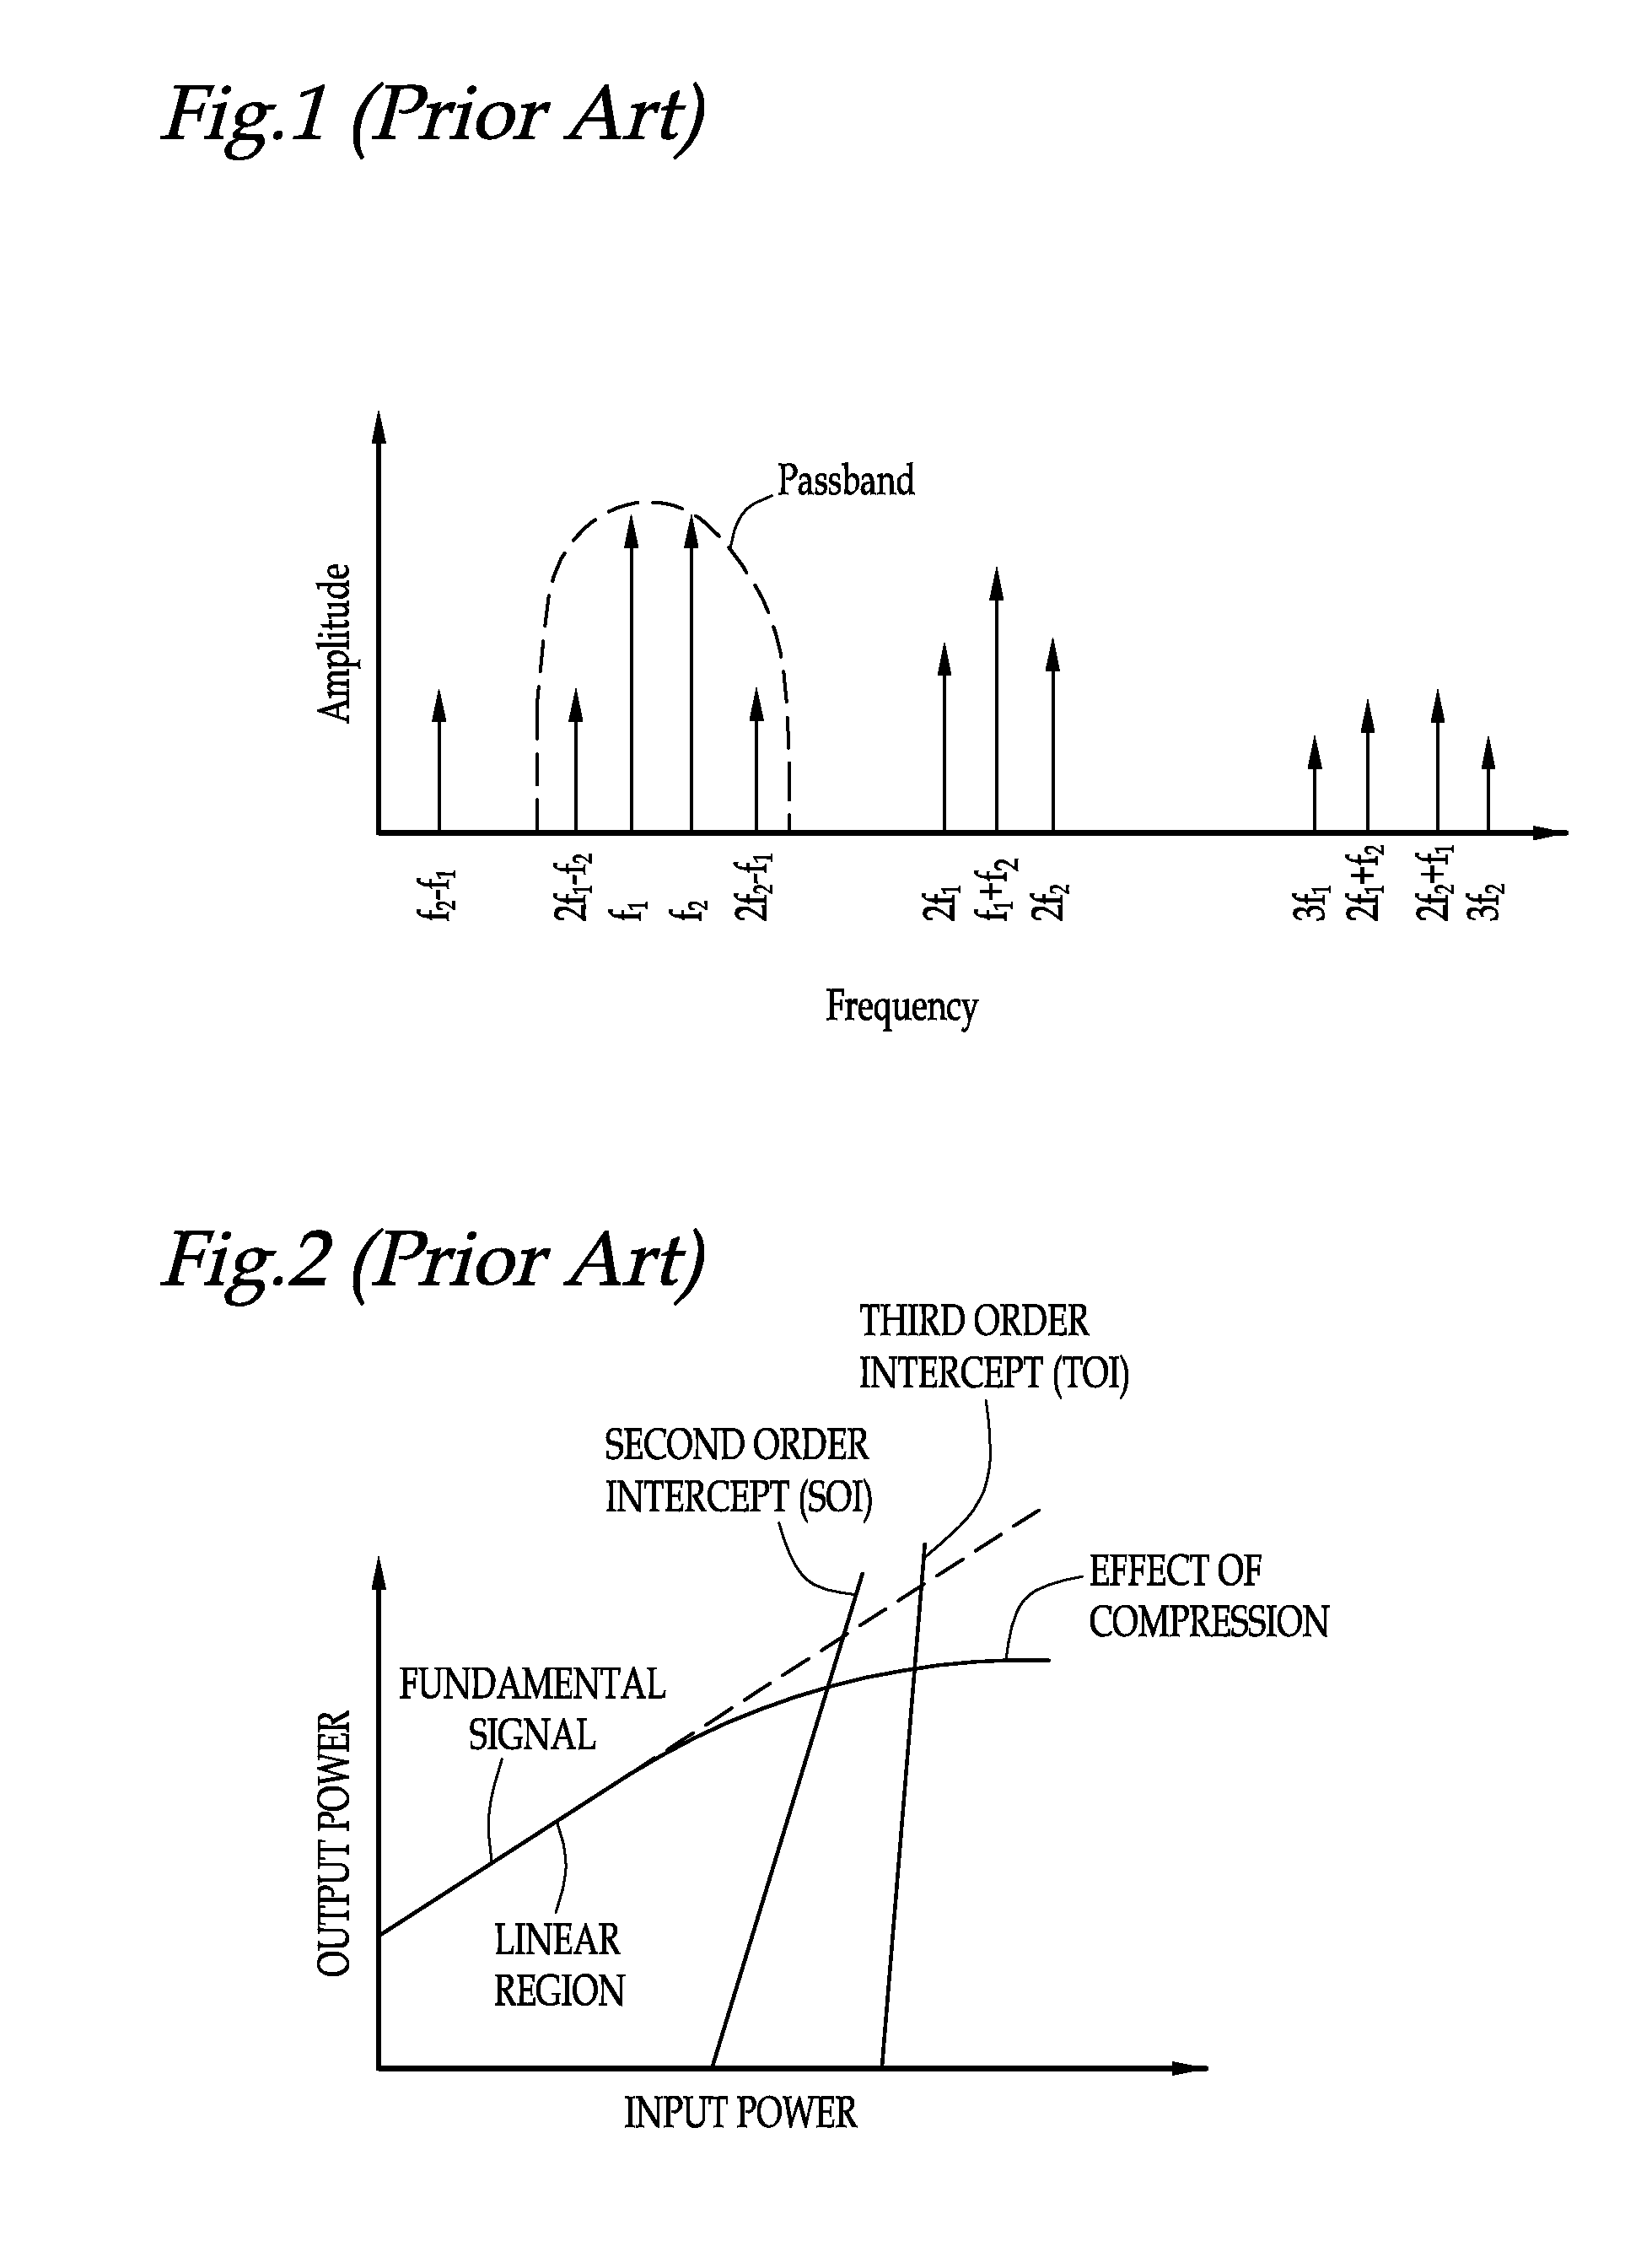 Electrical filters with improved intermodulation distortion